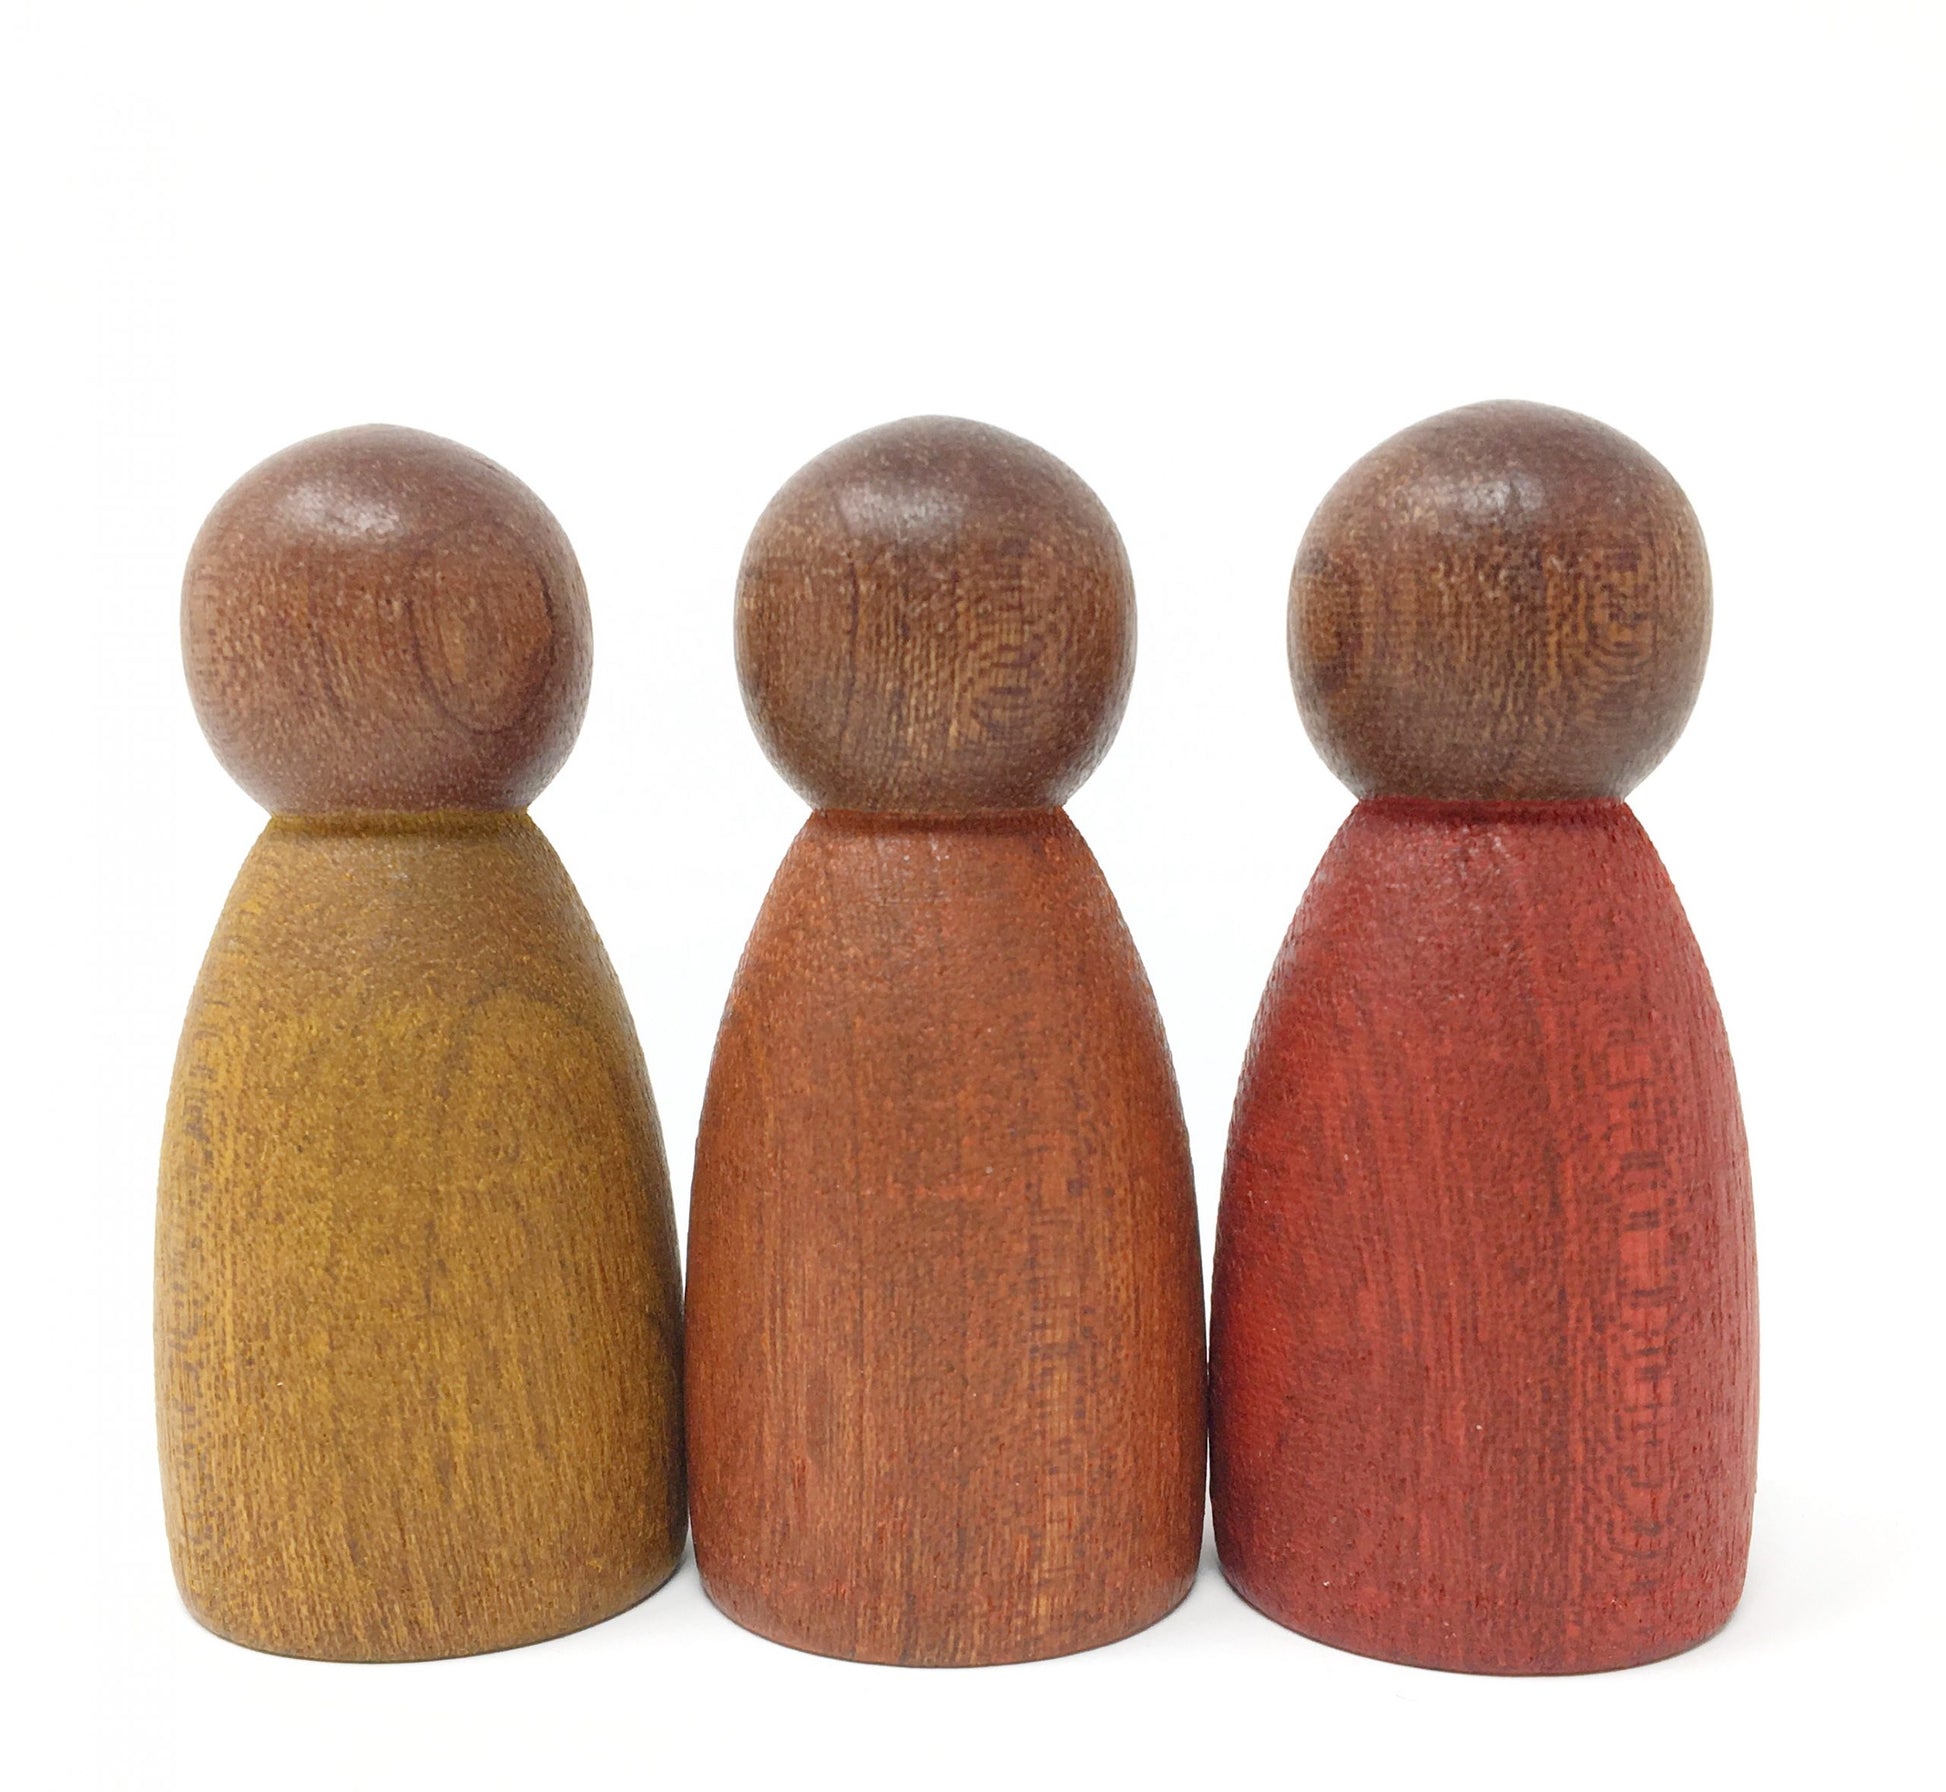 Three wooden peg people, one painted in mustard yellow, one in burnt orange, and one in red, from left to right.